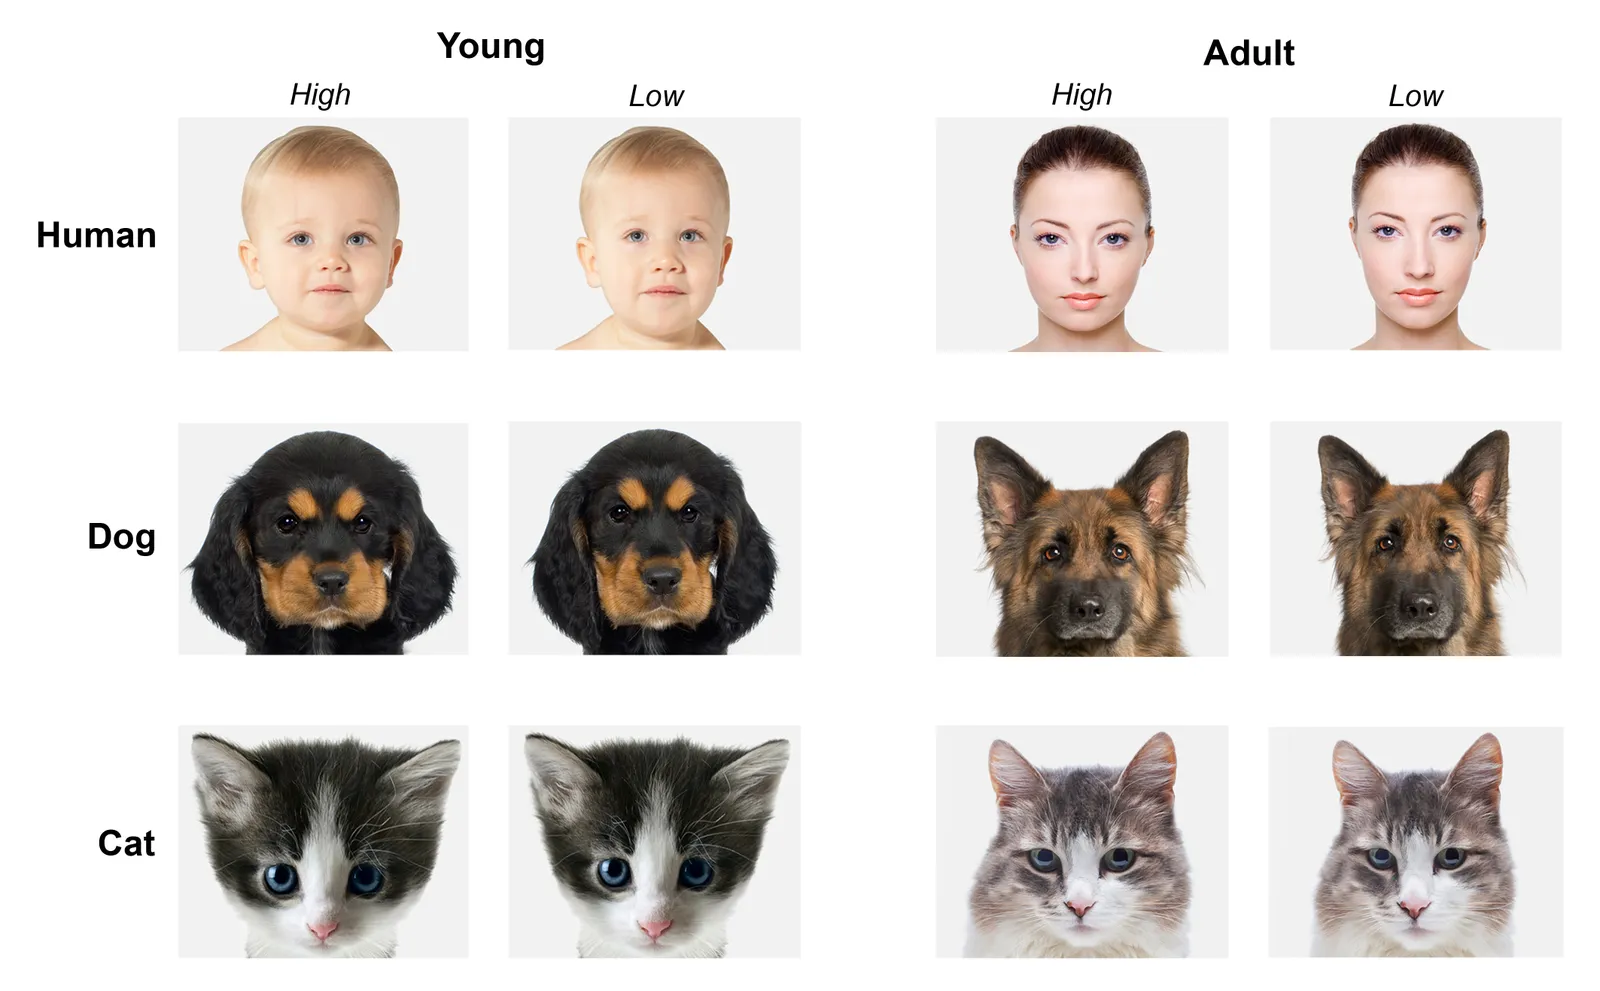 how do cats see humans vs dogs